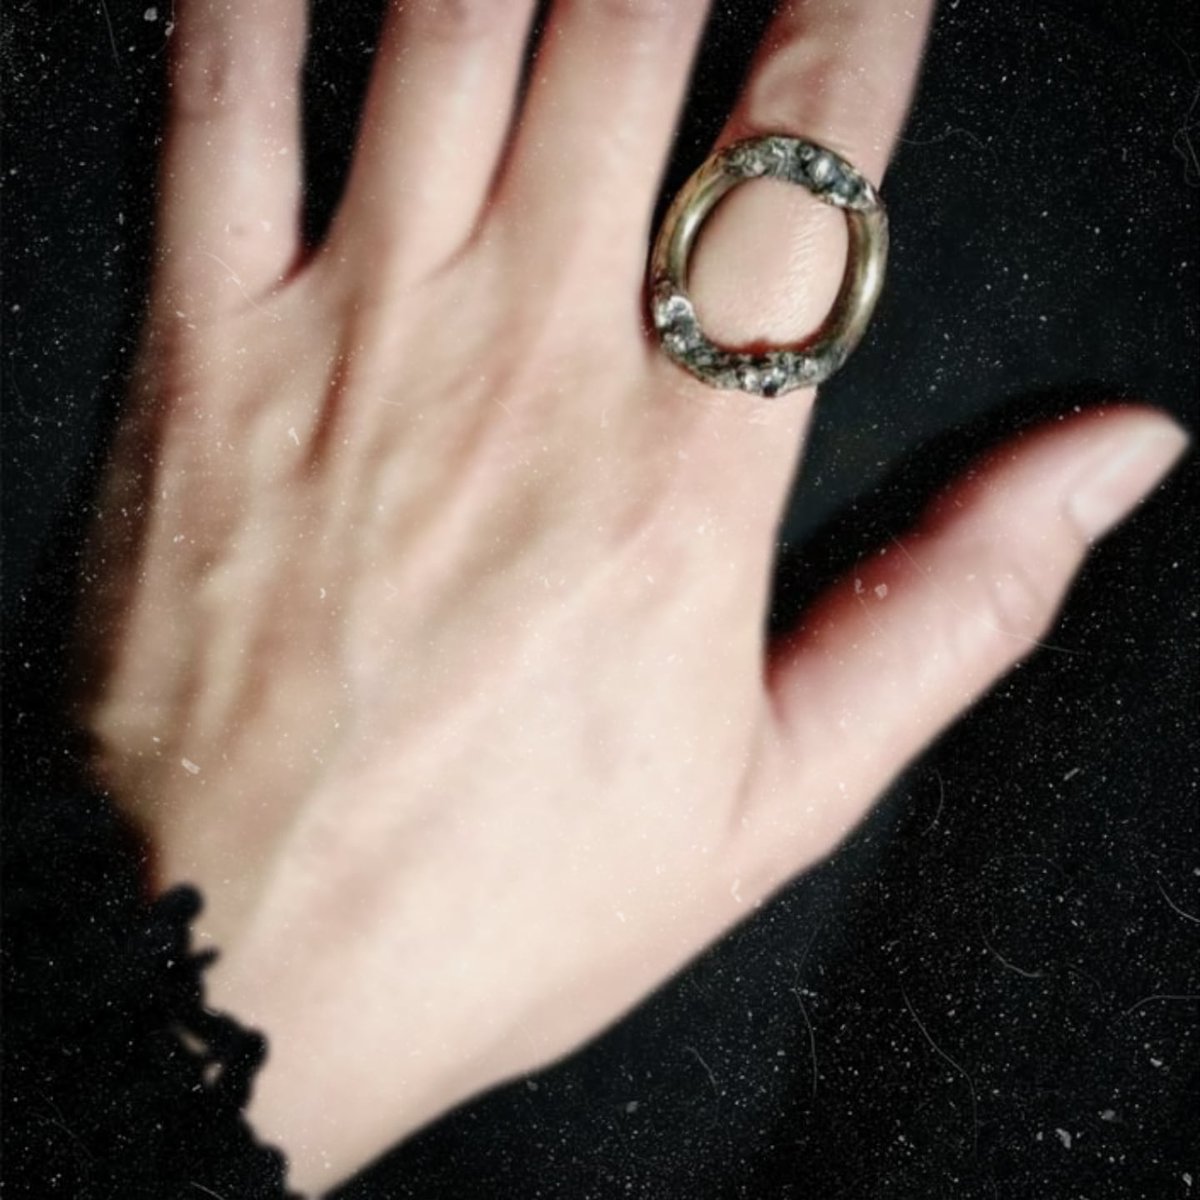 【Abstract∞A】New Handcrafted

Melting Ring

〈online shop〉
Abstract2022.handcrafted.jp

#abstract #artisan #brassaccessories #accessory #handmade #artjewelry #handmadeaccessory #artisanjewelry #contemporaryjewellery #silver925 #statementjewelry #handcrafted